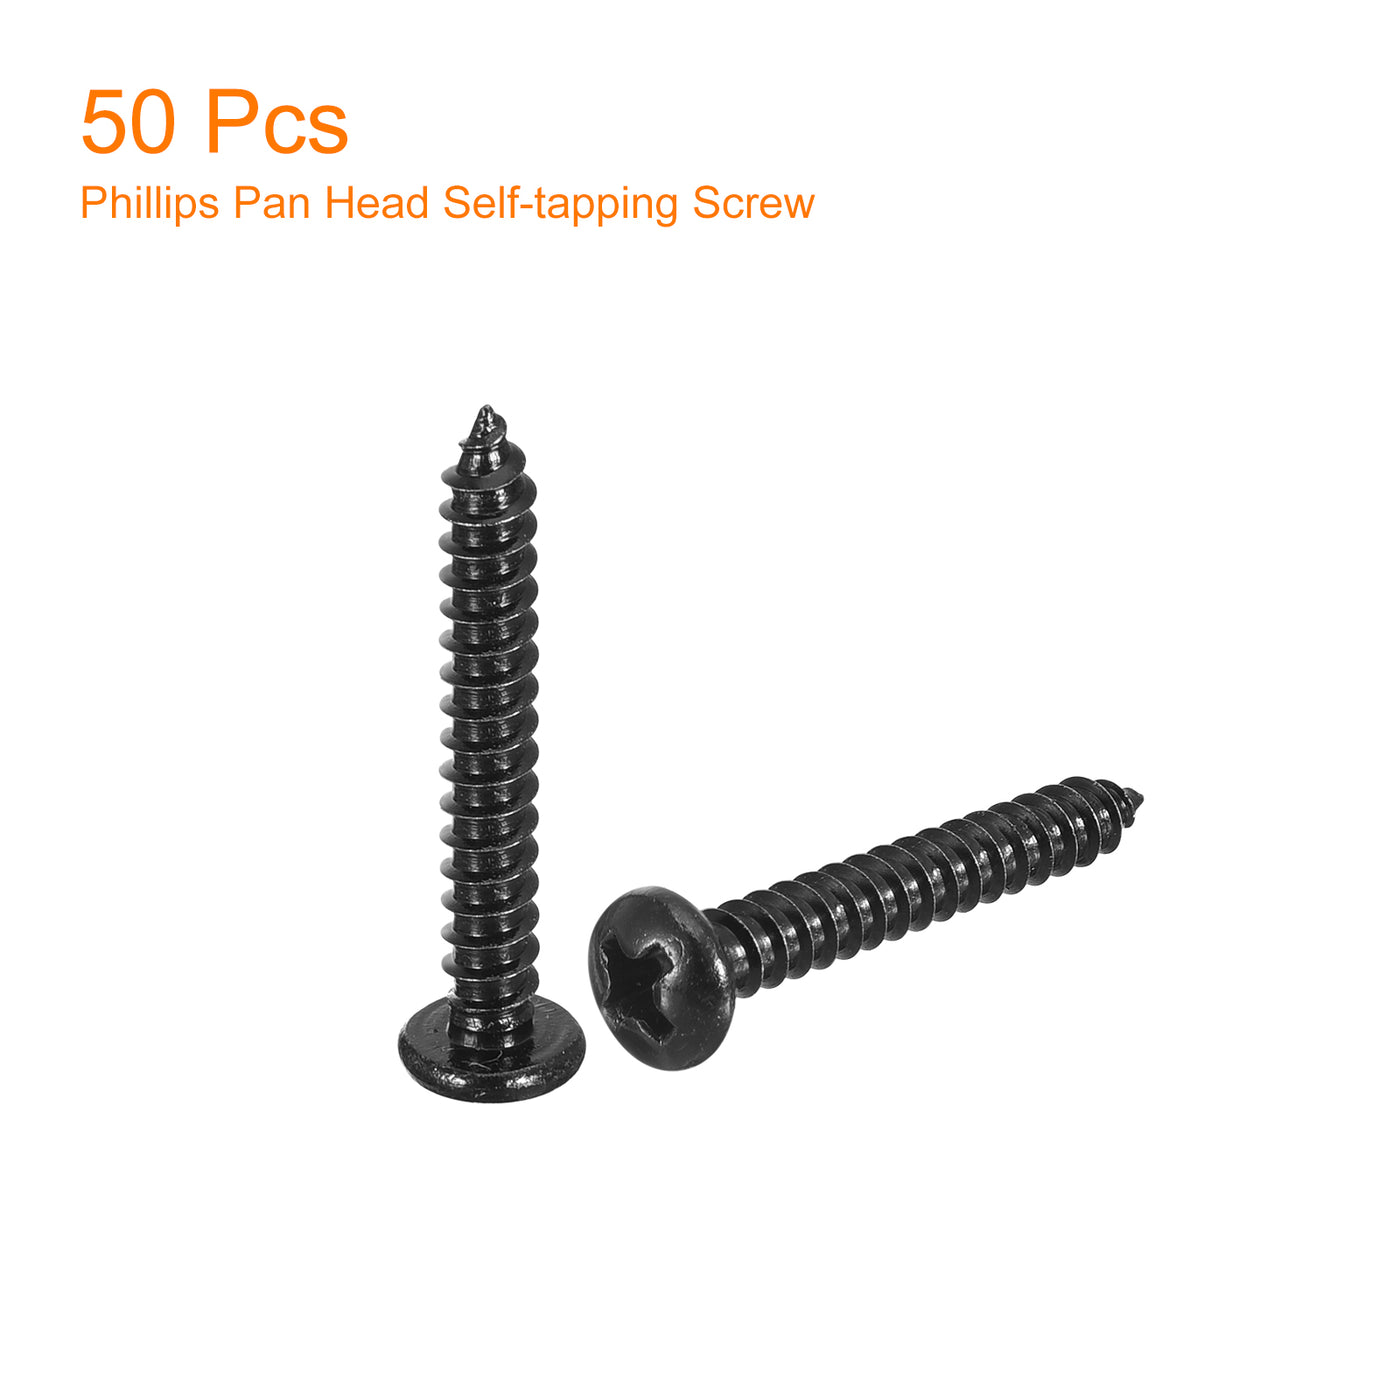 uxcell Uxcell #6 x 1" Phillips Pan Head Self-tapping Screw, 50pcs - 304 Stainless Steel Round Head Wood Screw Full Thread (Black)